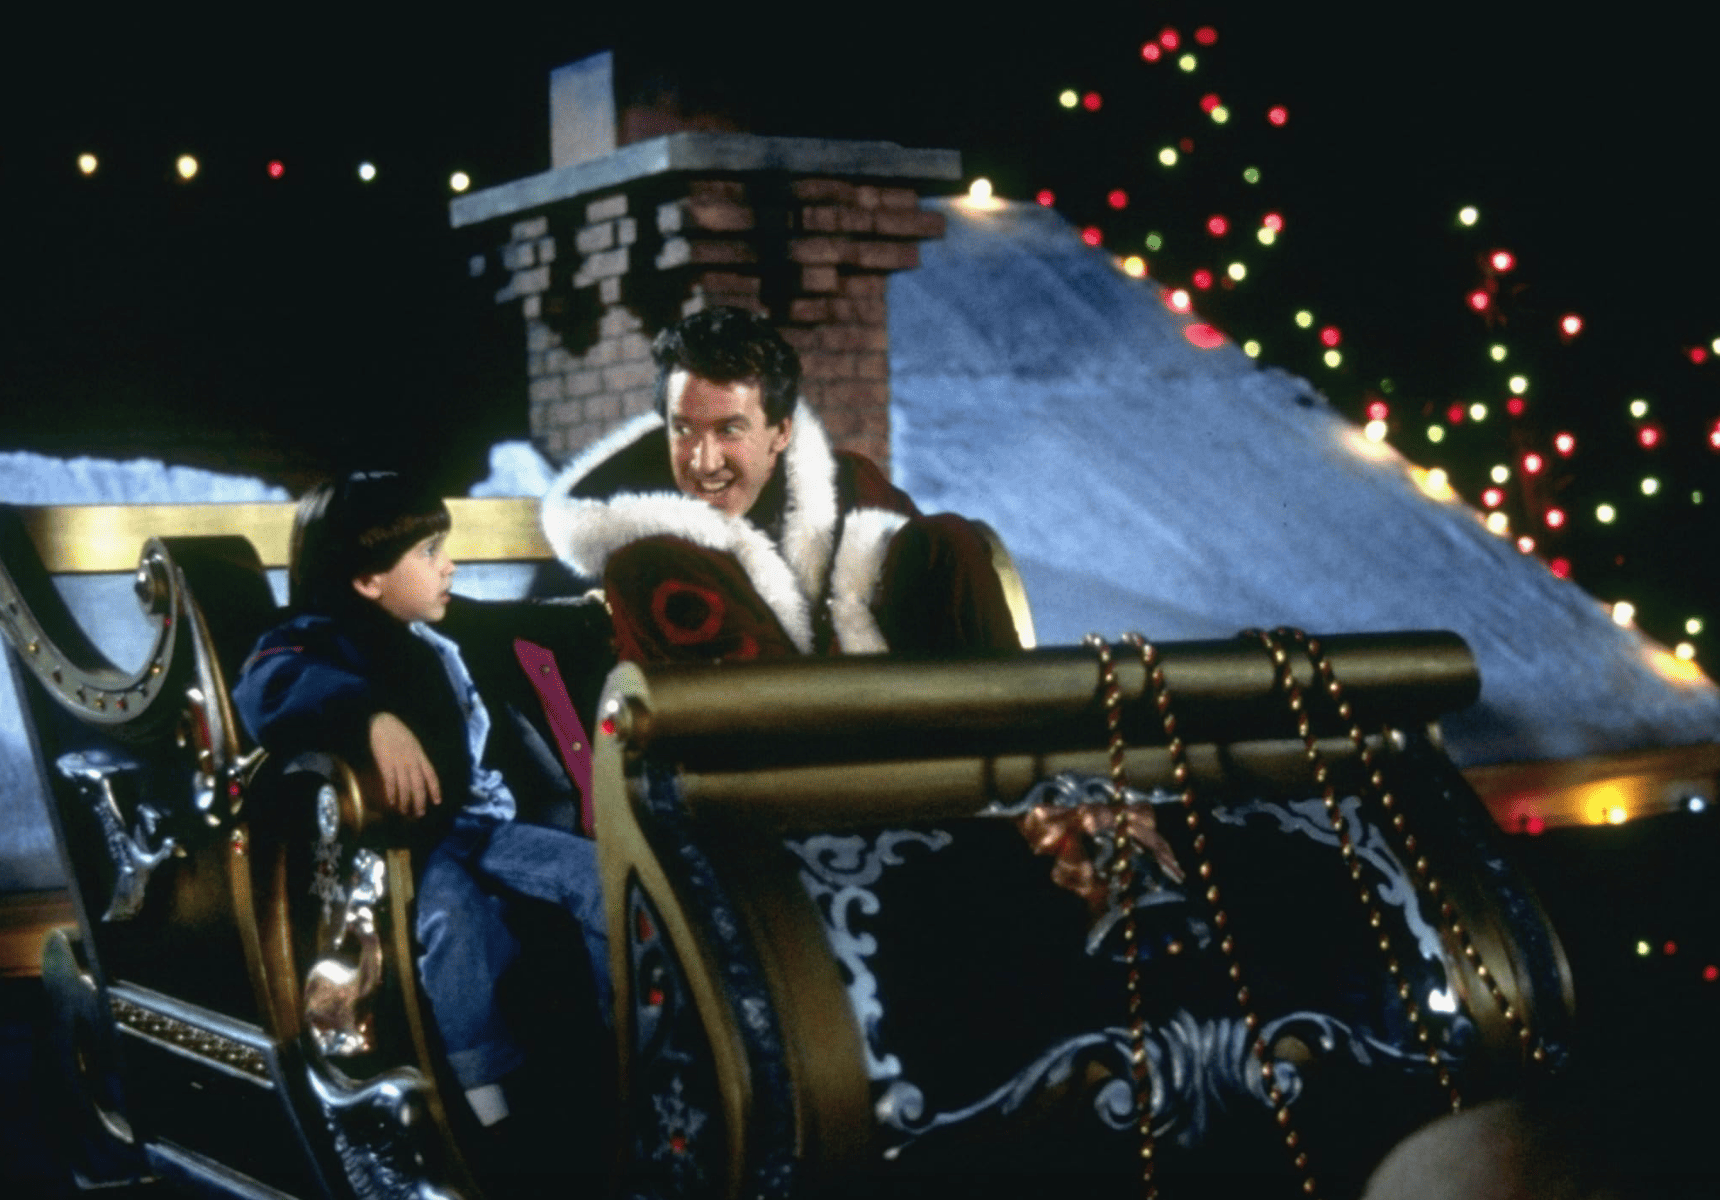 A man inadvertently becomes the new Santa Claus in this image from Walt Disney Pictures.